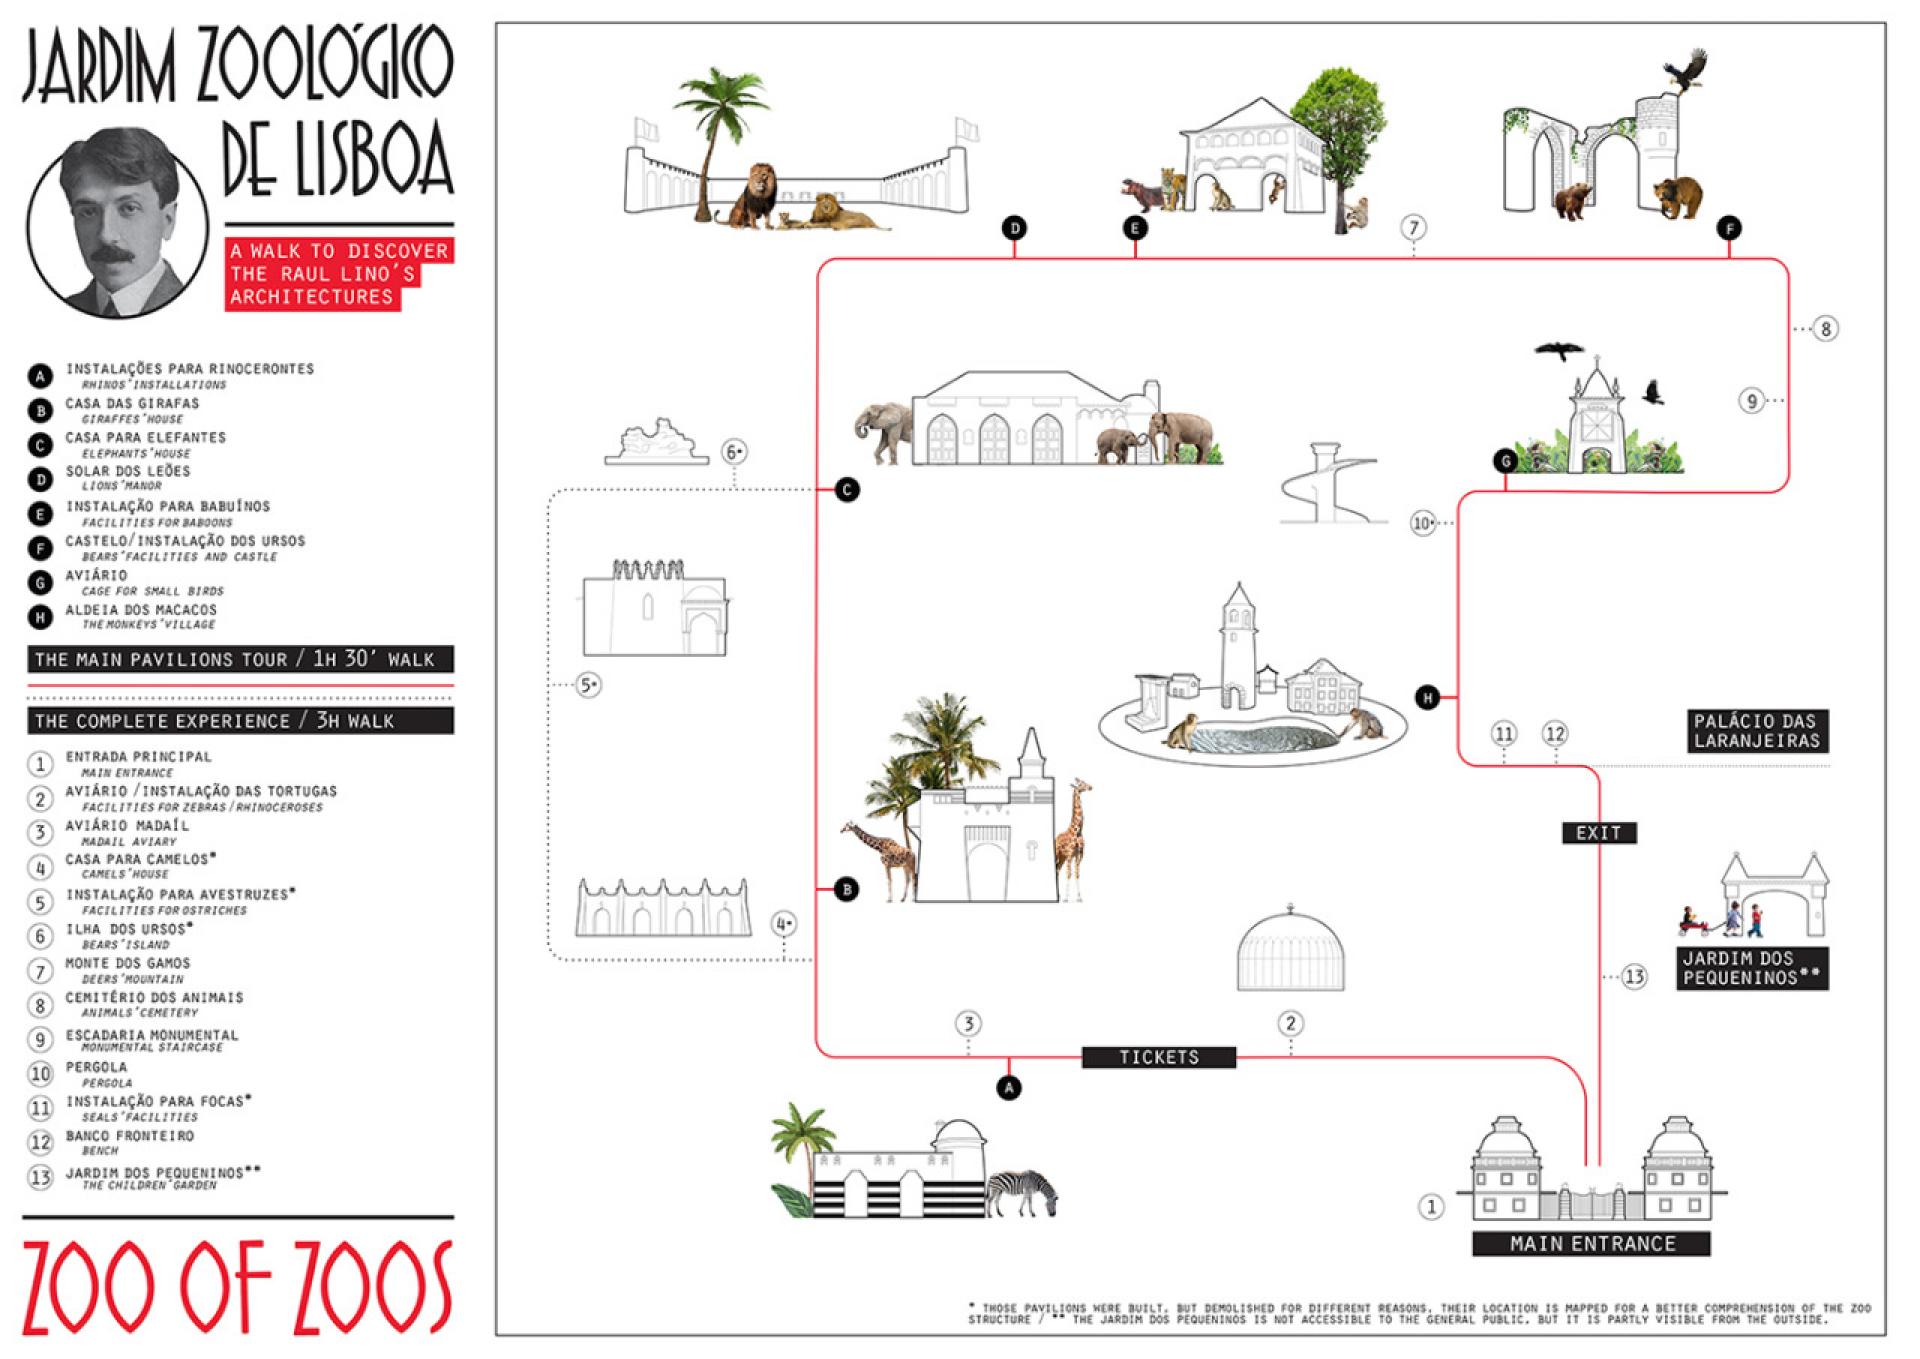 Map "A walk to discover Raul Lino’s architecture in the Lisbon Zoological Garden” designed by the exhibition curatorial team